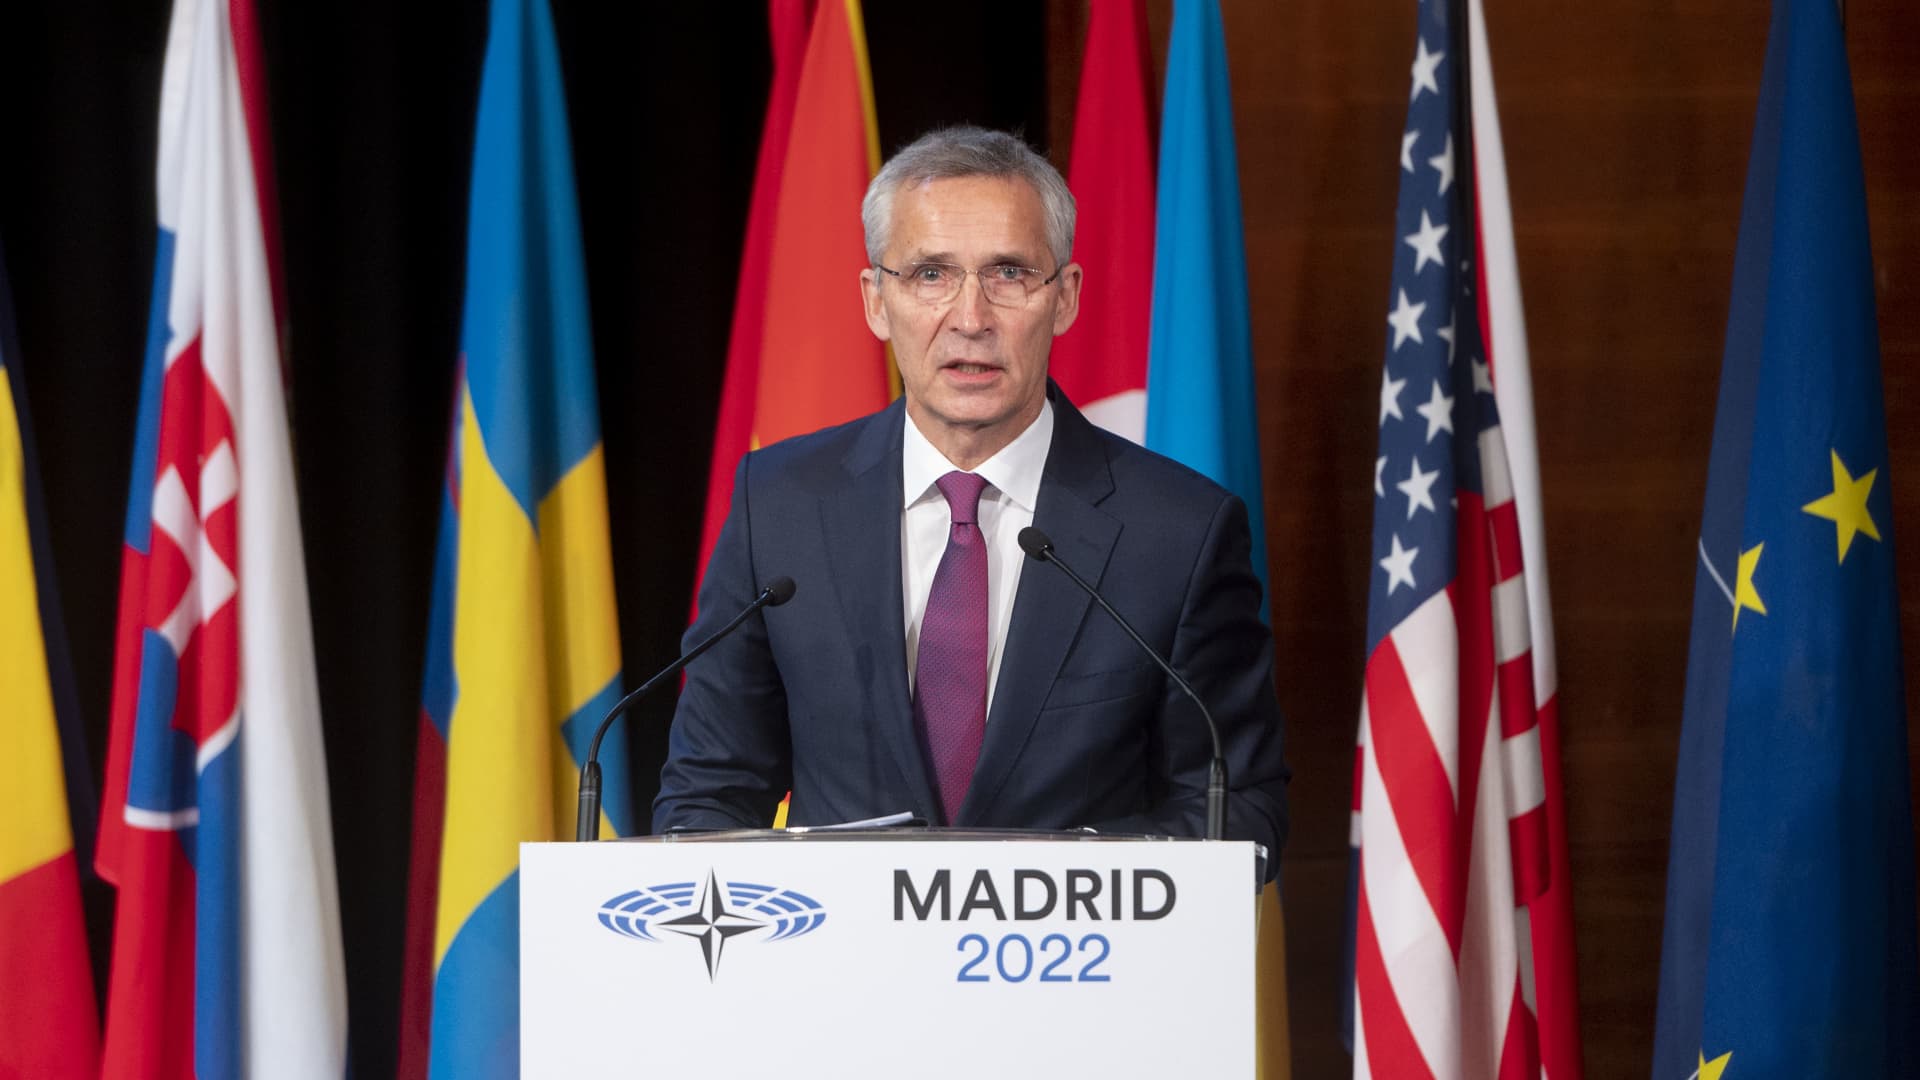 Trust between the West and Russia has been destroyed, NATO chief says